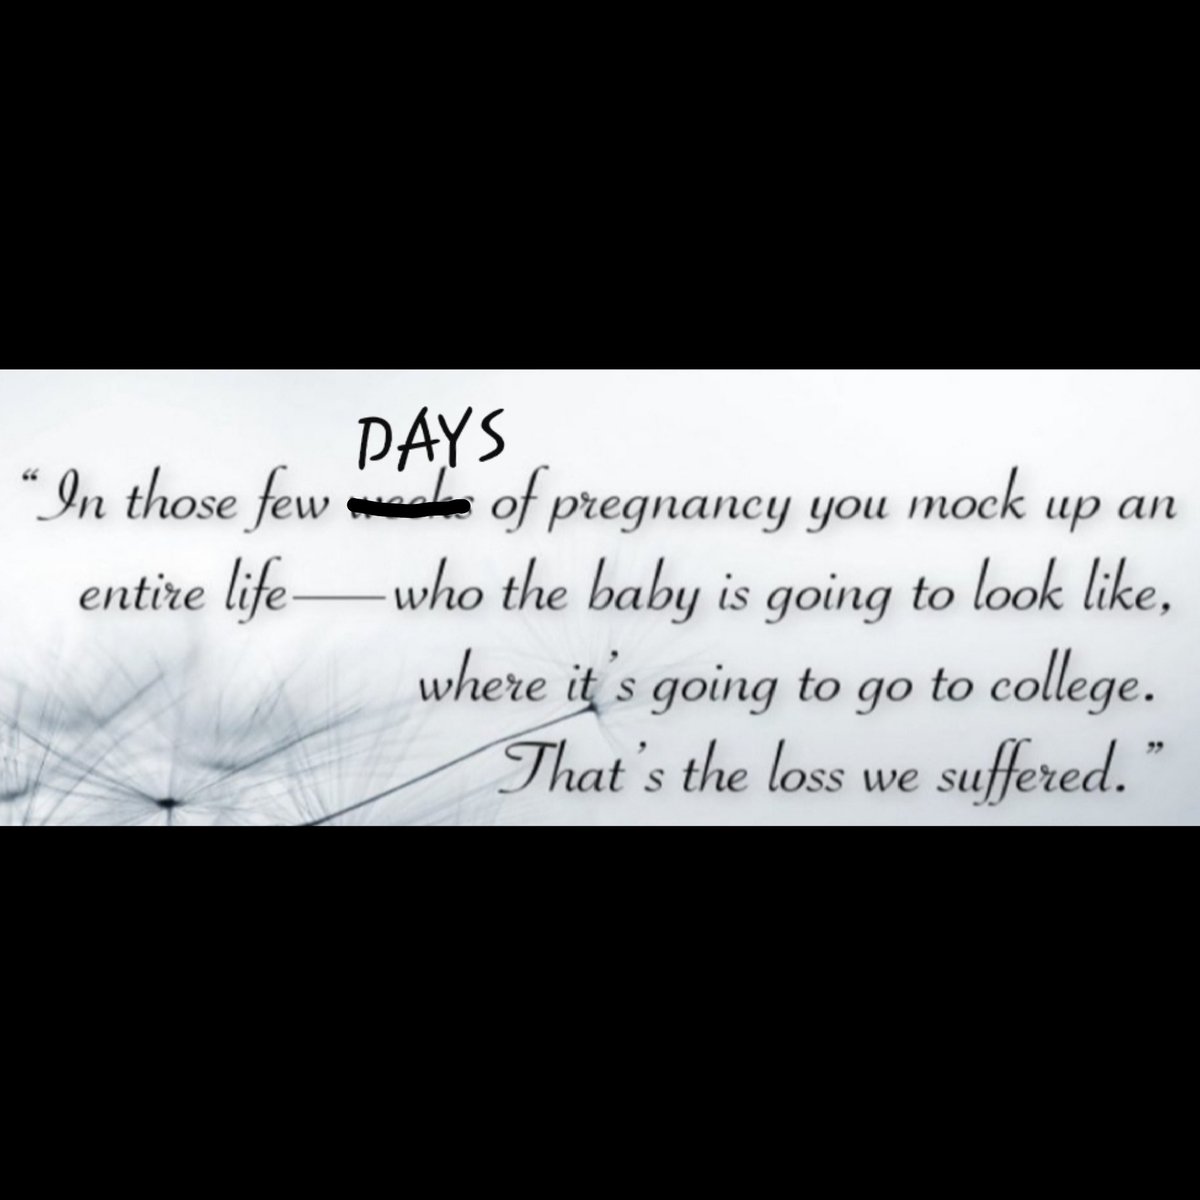 For all the mothers out there who don't feel like your #Miscarriage counts because it was early.. I'm praying you find peace  🙏🏻💔🤱🏻#EarlyMiscarriage #BabyLoss